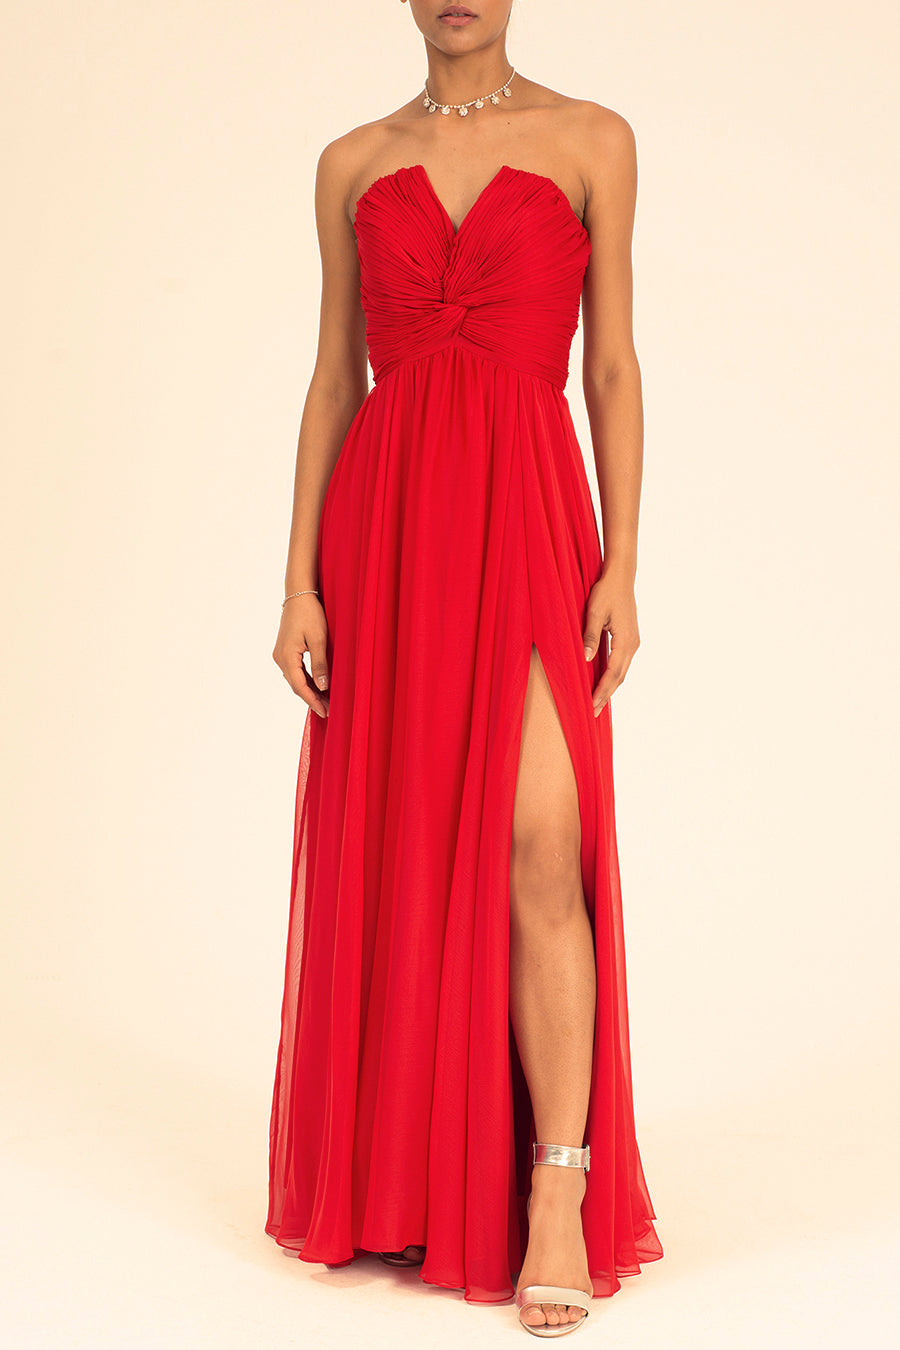 Leah - Mystic Evenings | Evening and Prom Dresses